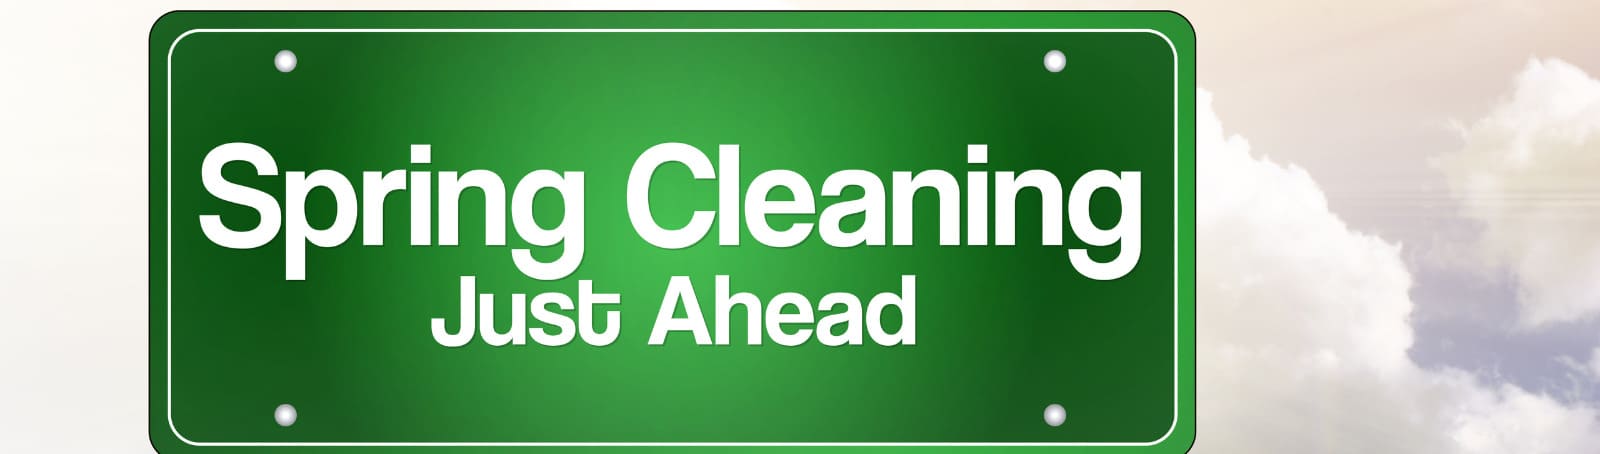 Spring Cleaning Made Easy with Pimaccounting's Budgeting and Planning Tools